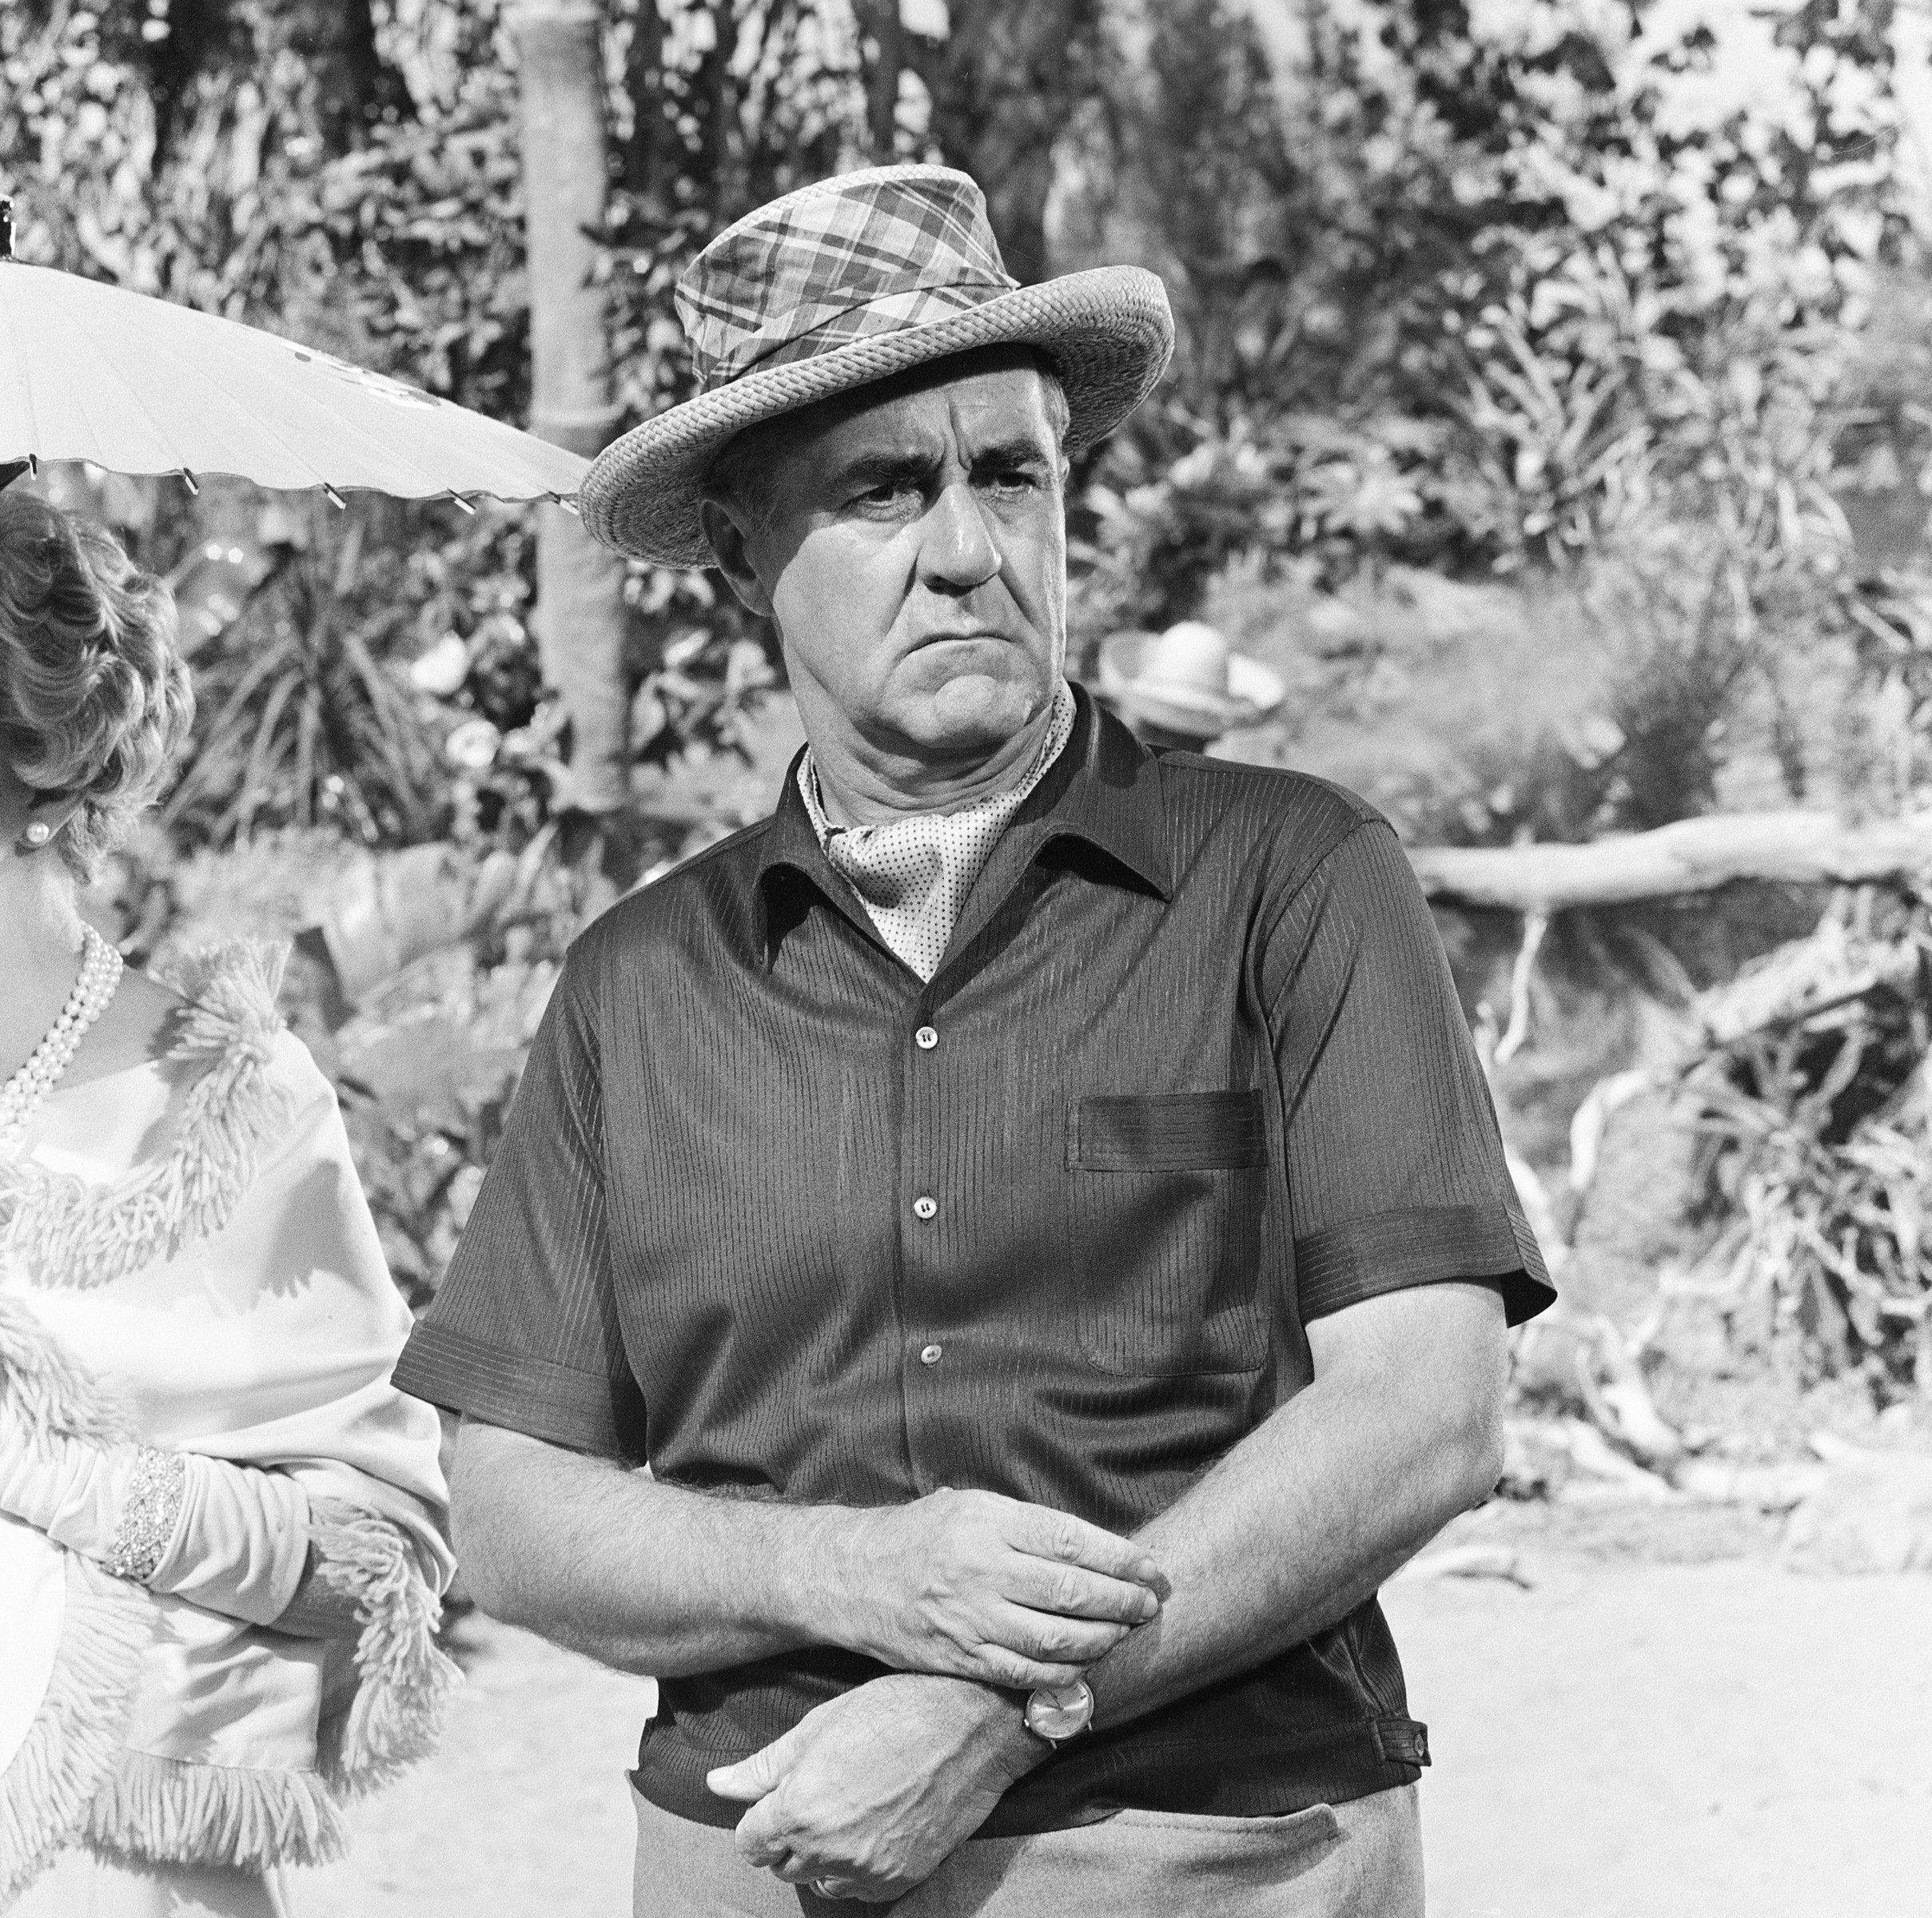 Thurston Howell III in front of trees